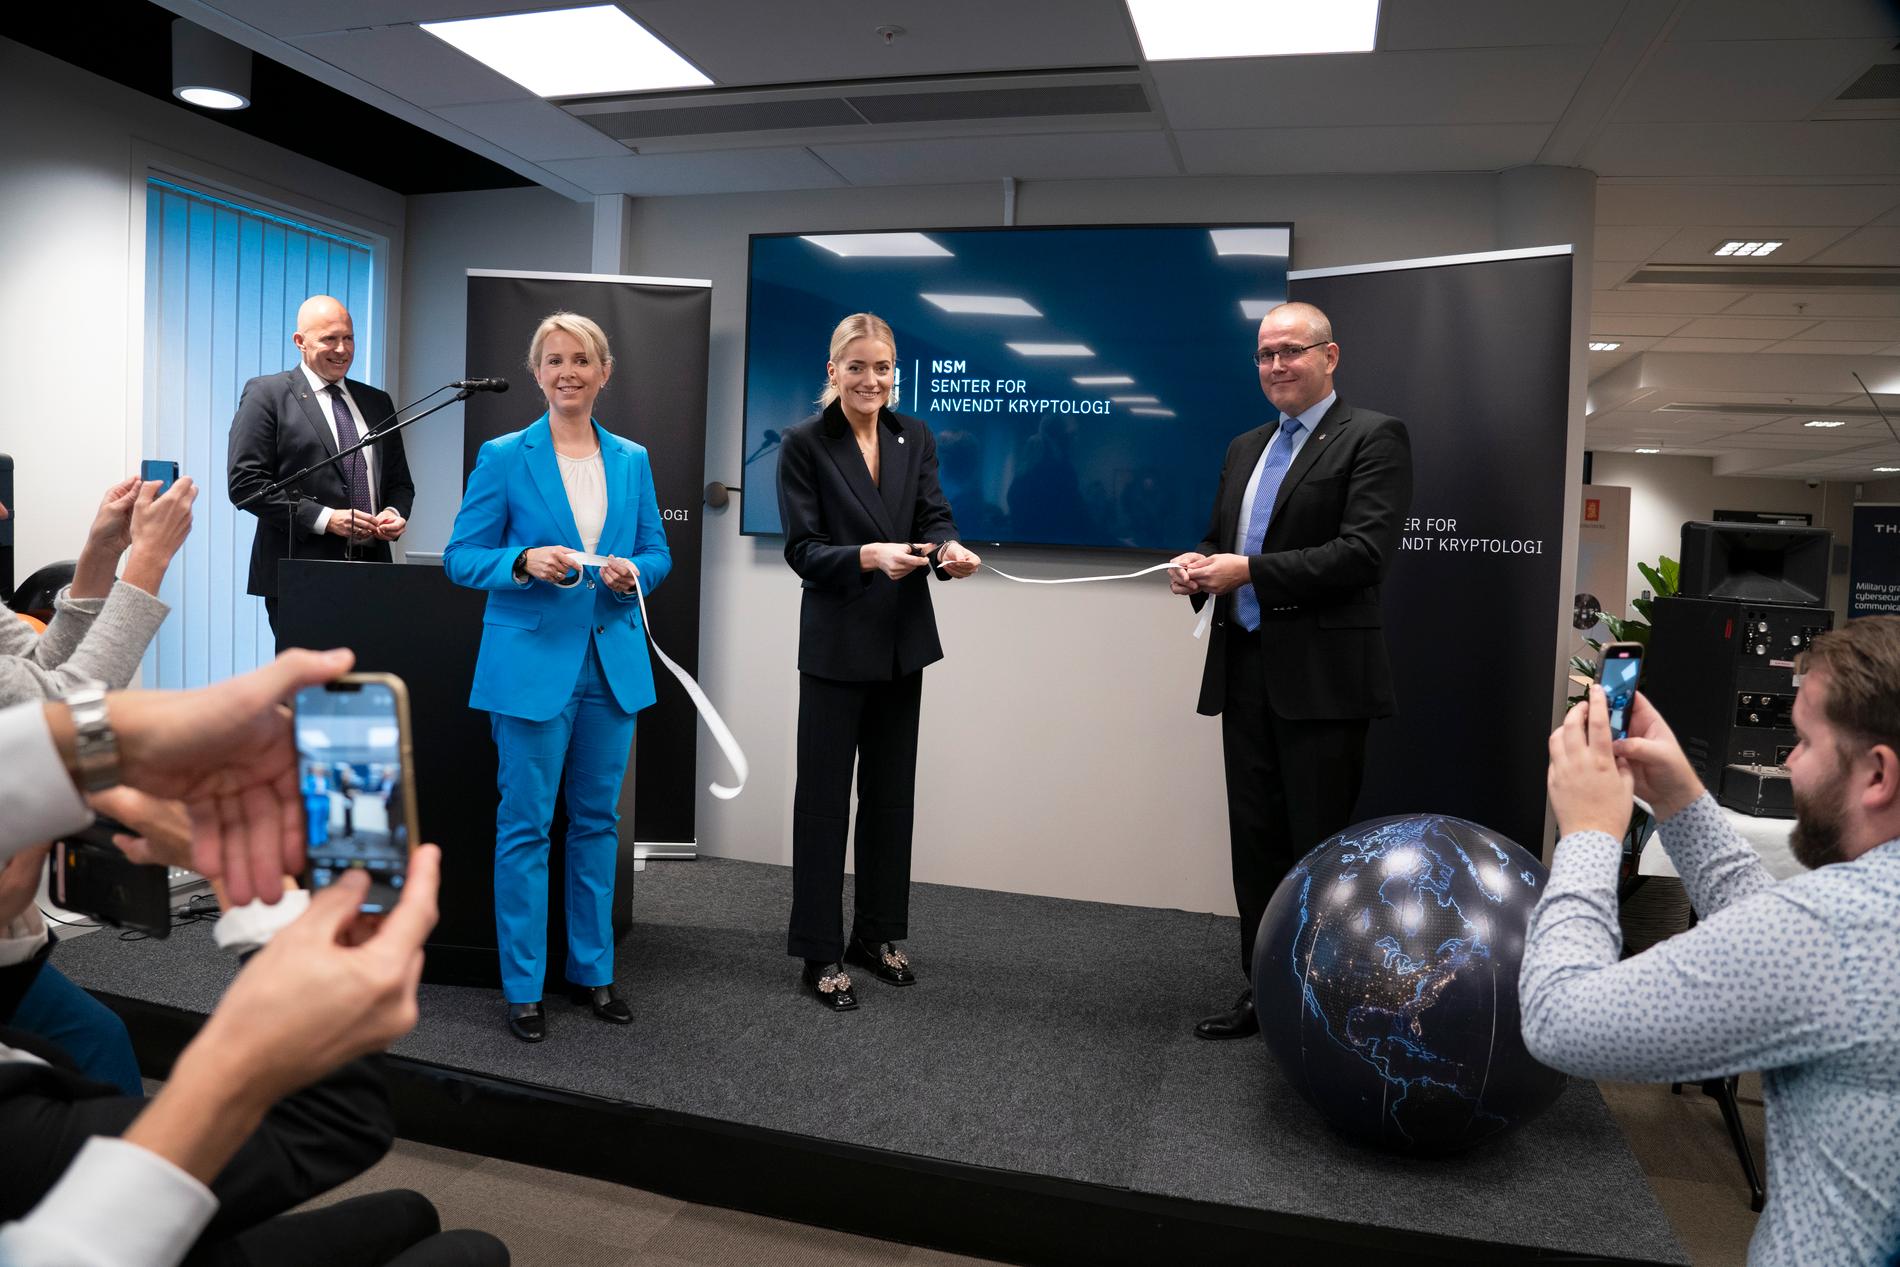 Celebrated on borrowed time: Here, then-NSM President Sophie Nyström and Justice Minister Emilie Inger-Mehl (Sp) are pictured at the NSM headquarters in Fornebu in October 2023. The occasion was the inauguration of Applied Cryptography in Fornebu.  On the right is Geir Arild Inge Hellesvik, who heads the Defense Against Advanced Digital Threats division at NSM.